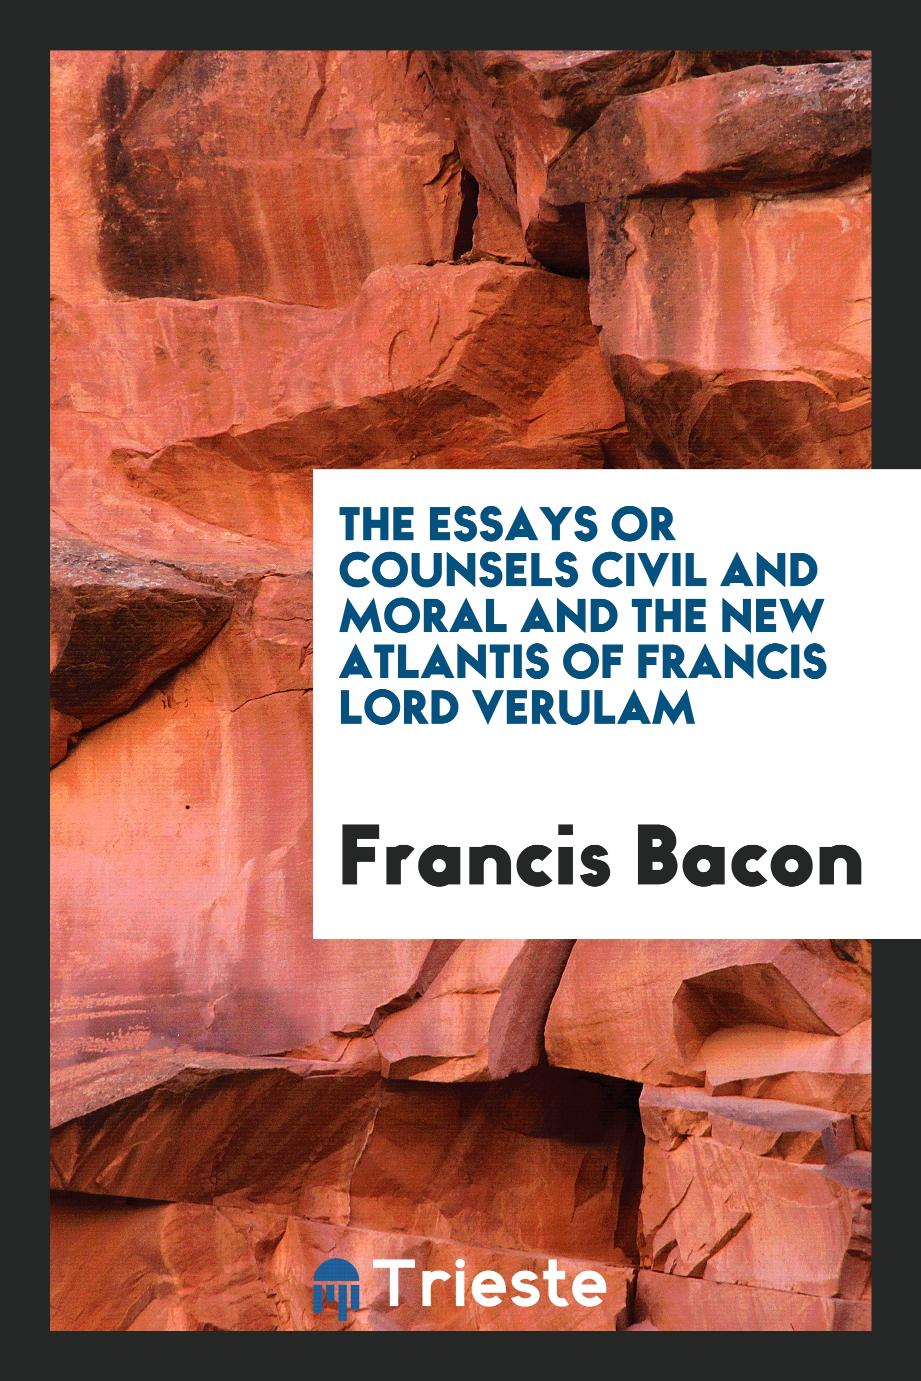 The essays or counsels civil and moral and the new Atlantis of Francis Lord Verulam